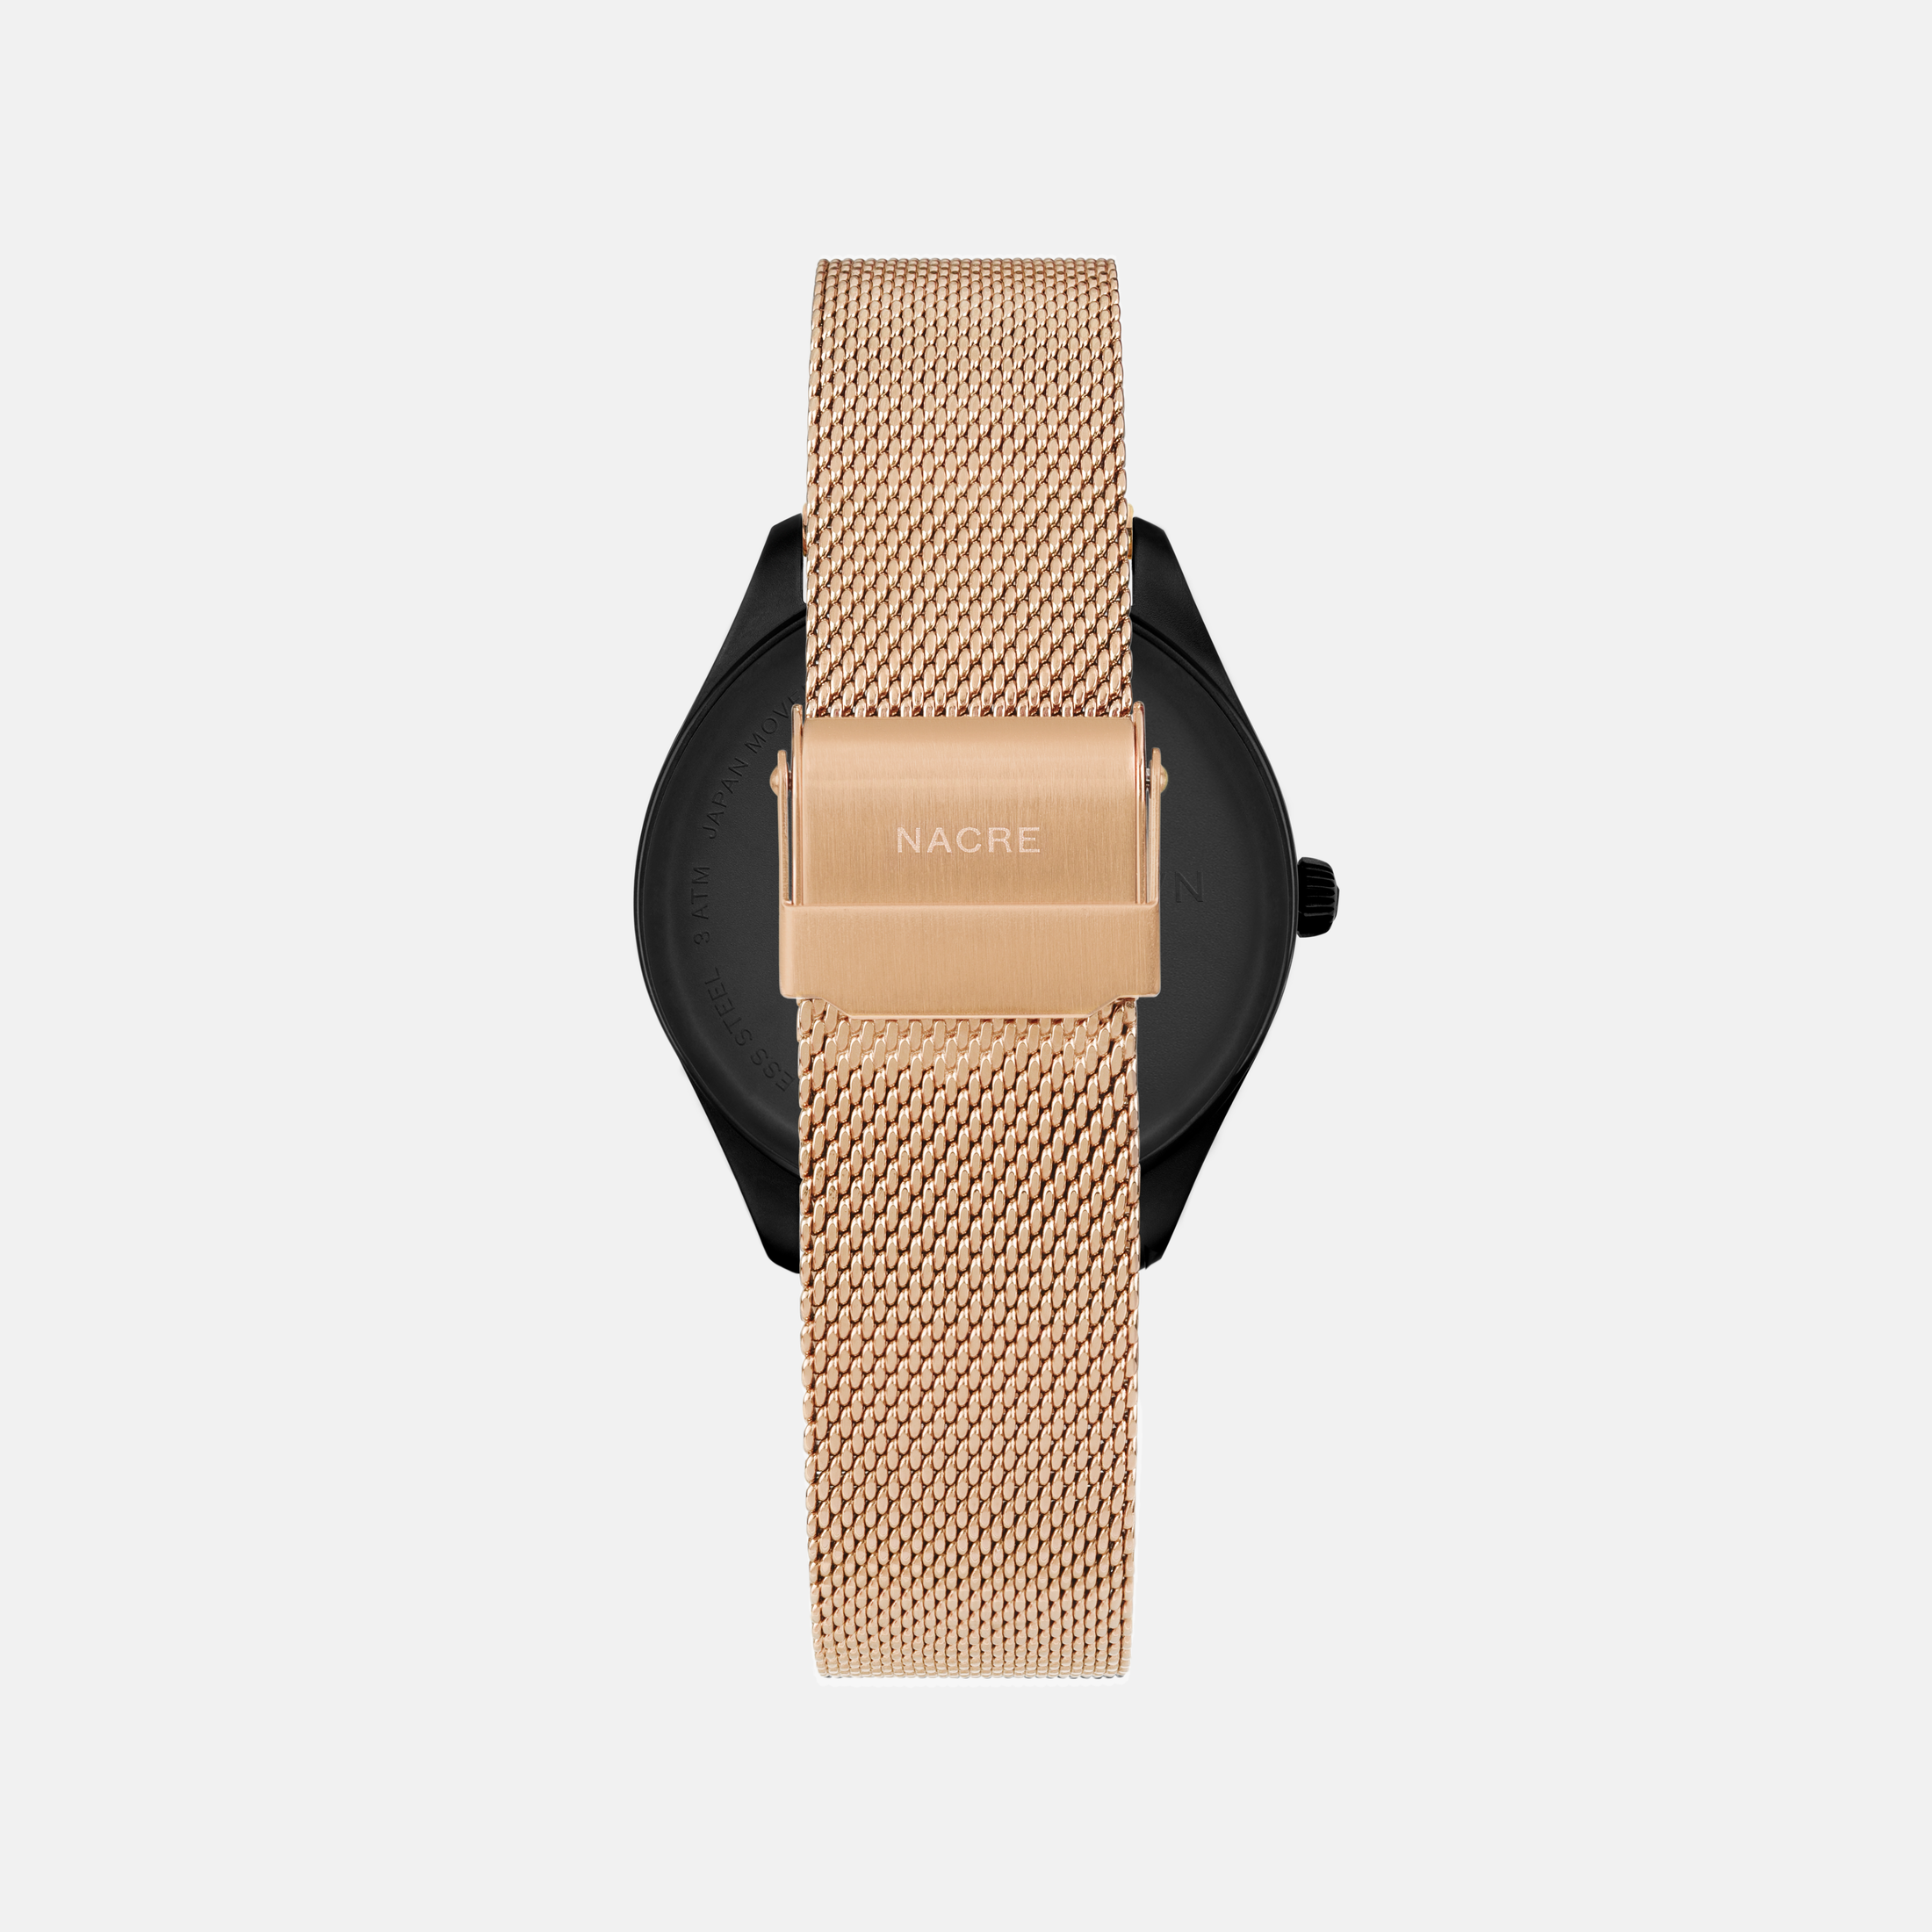 Lune 8 - Rose Gold - Natural Leather